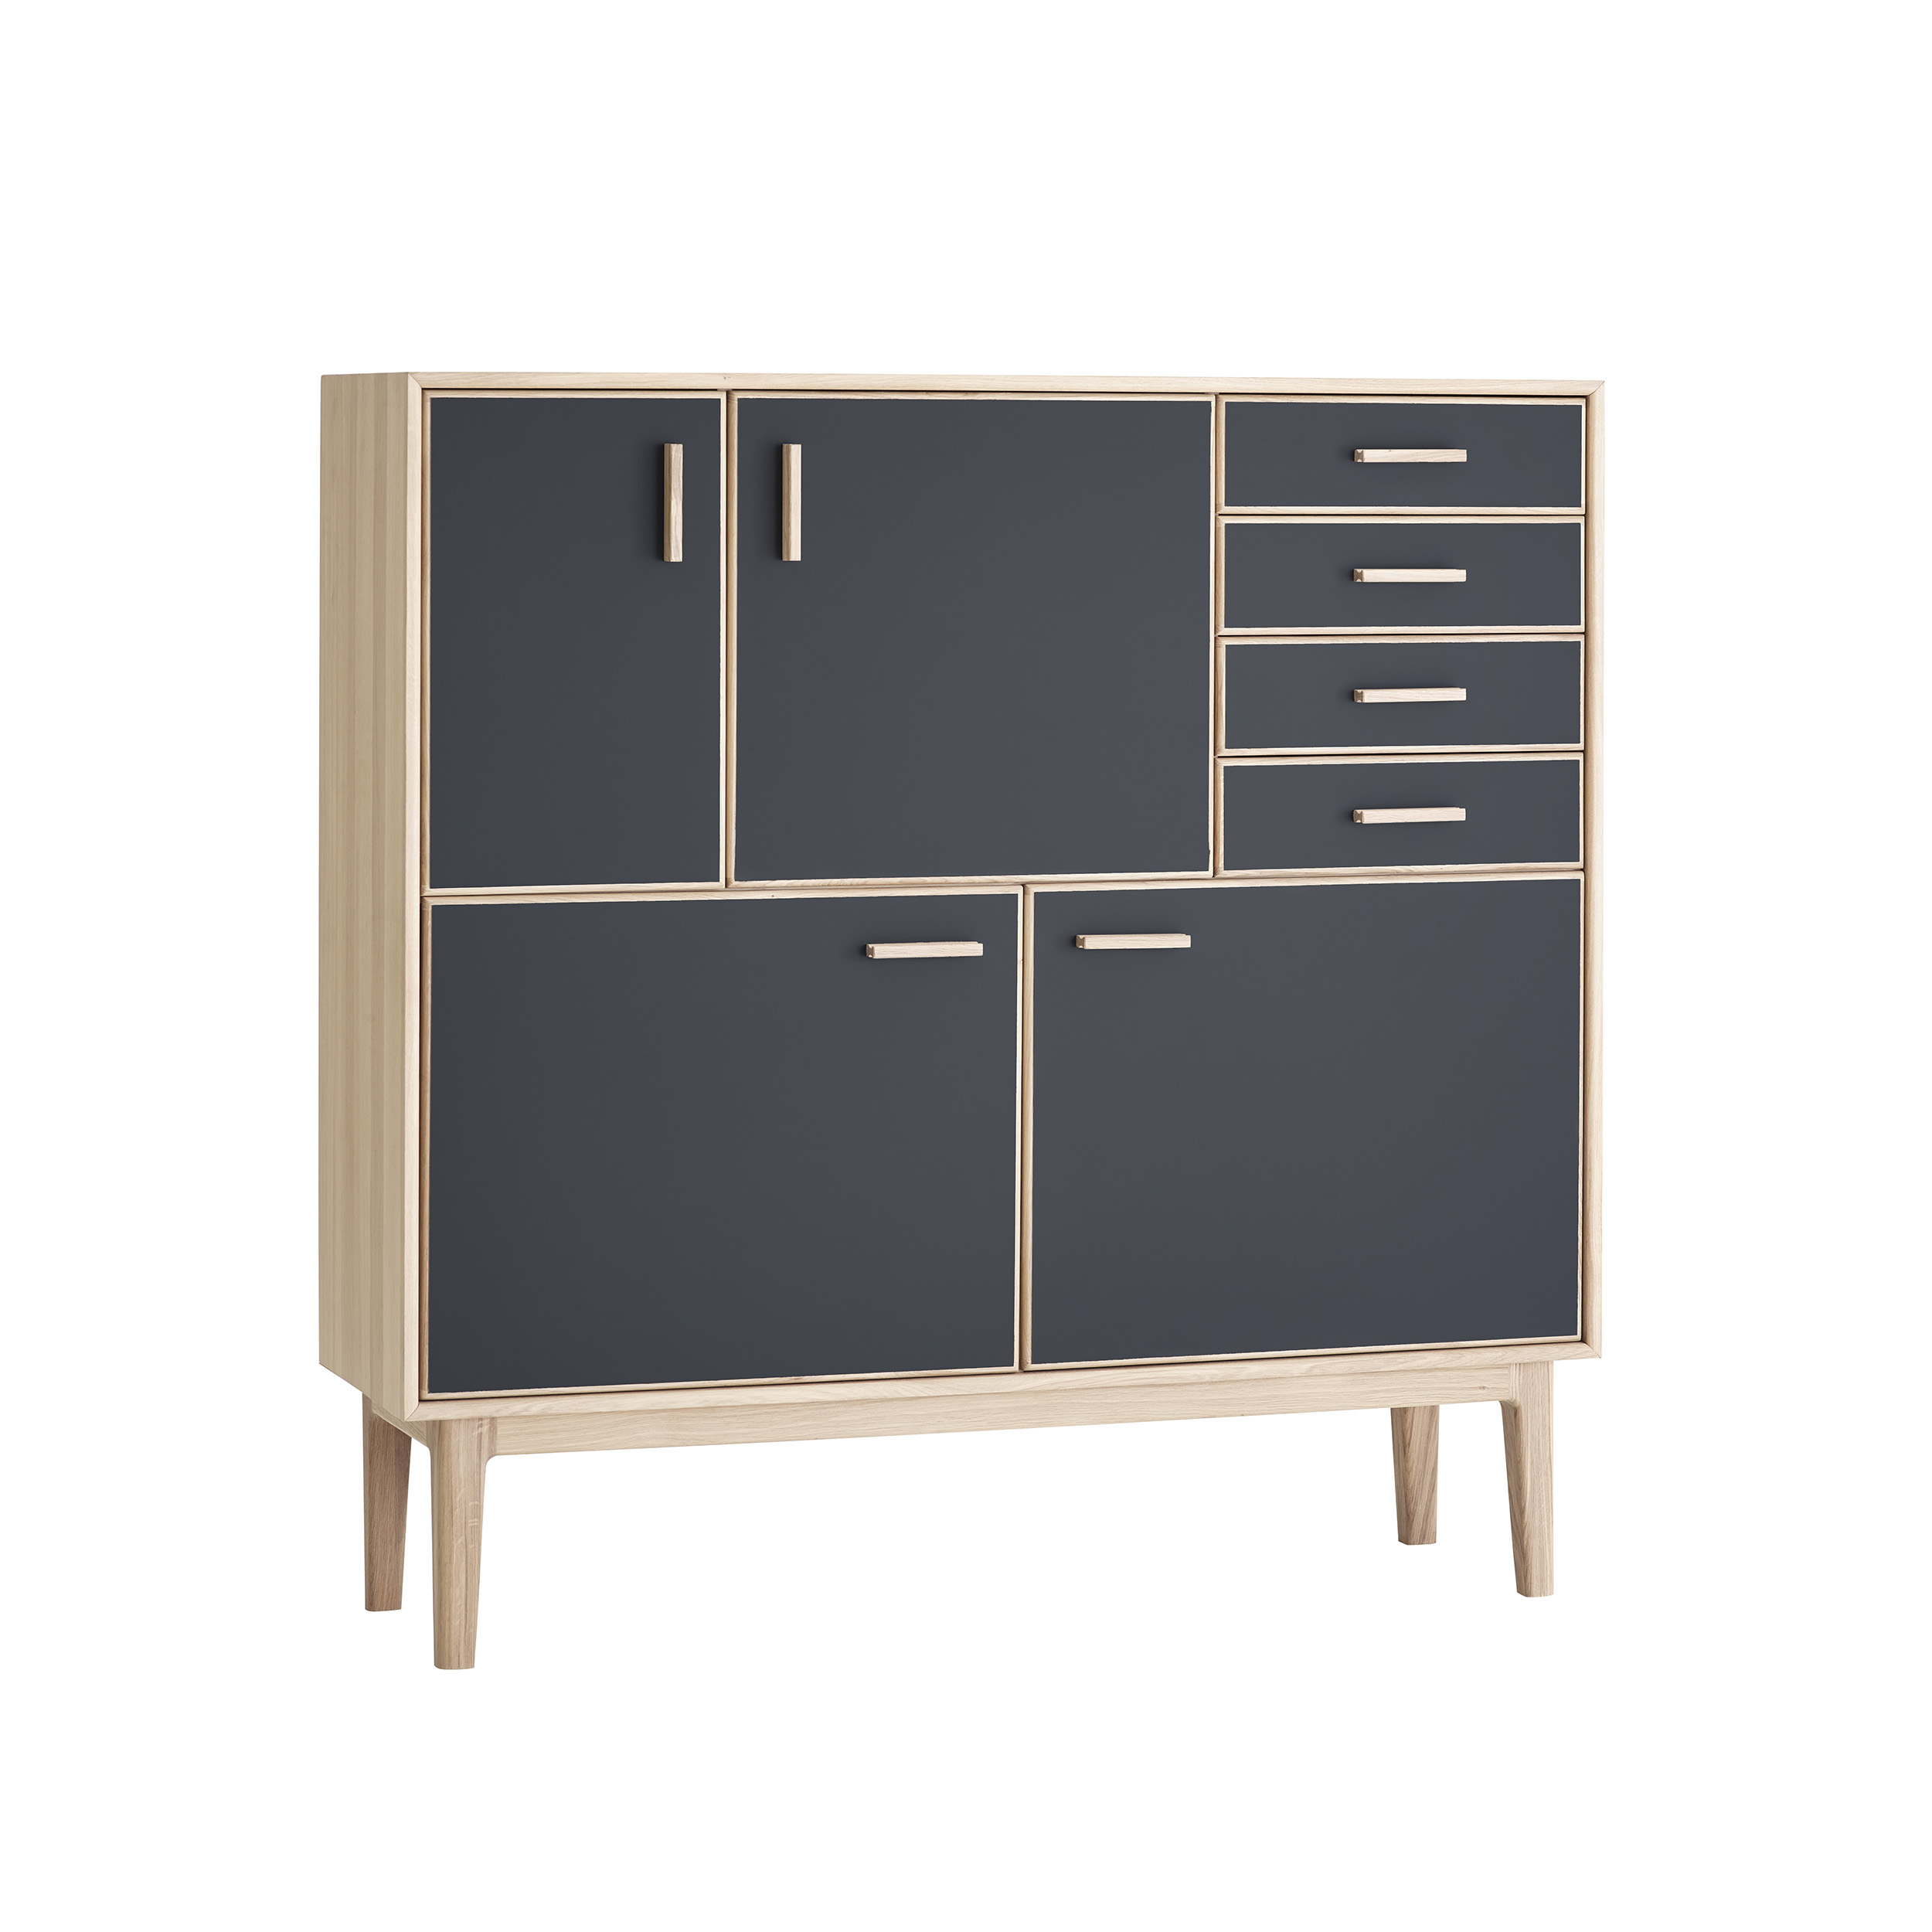 You are currently viewing CASØ 700 highboard